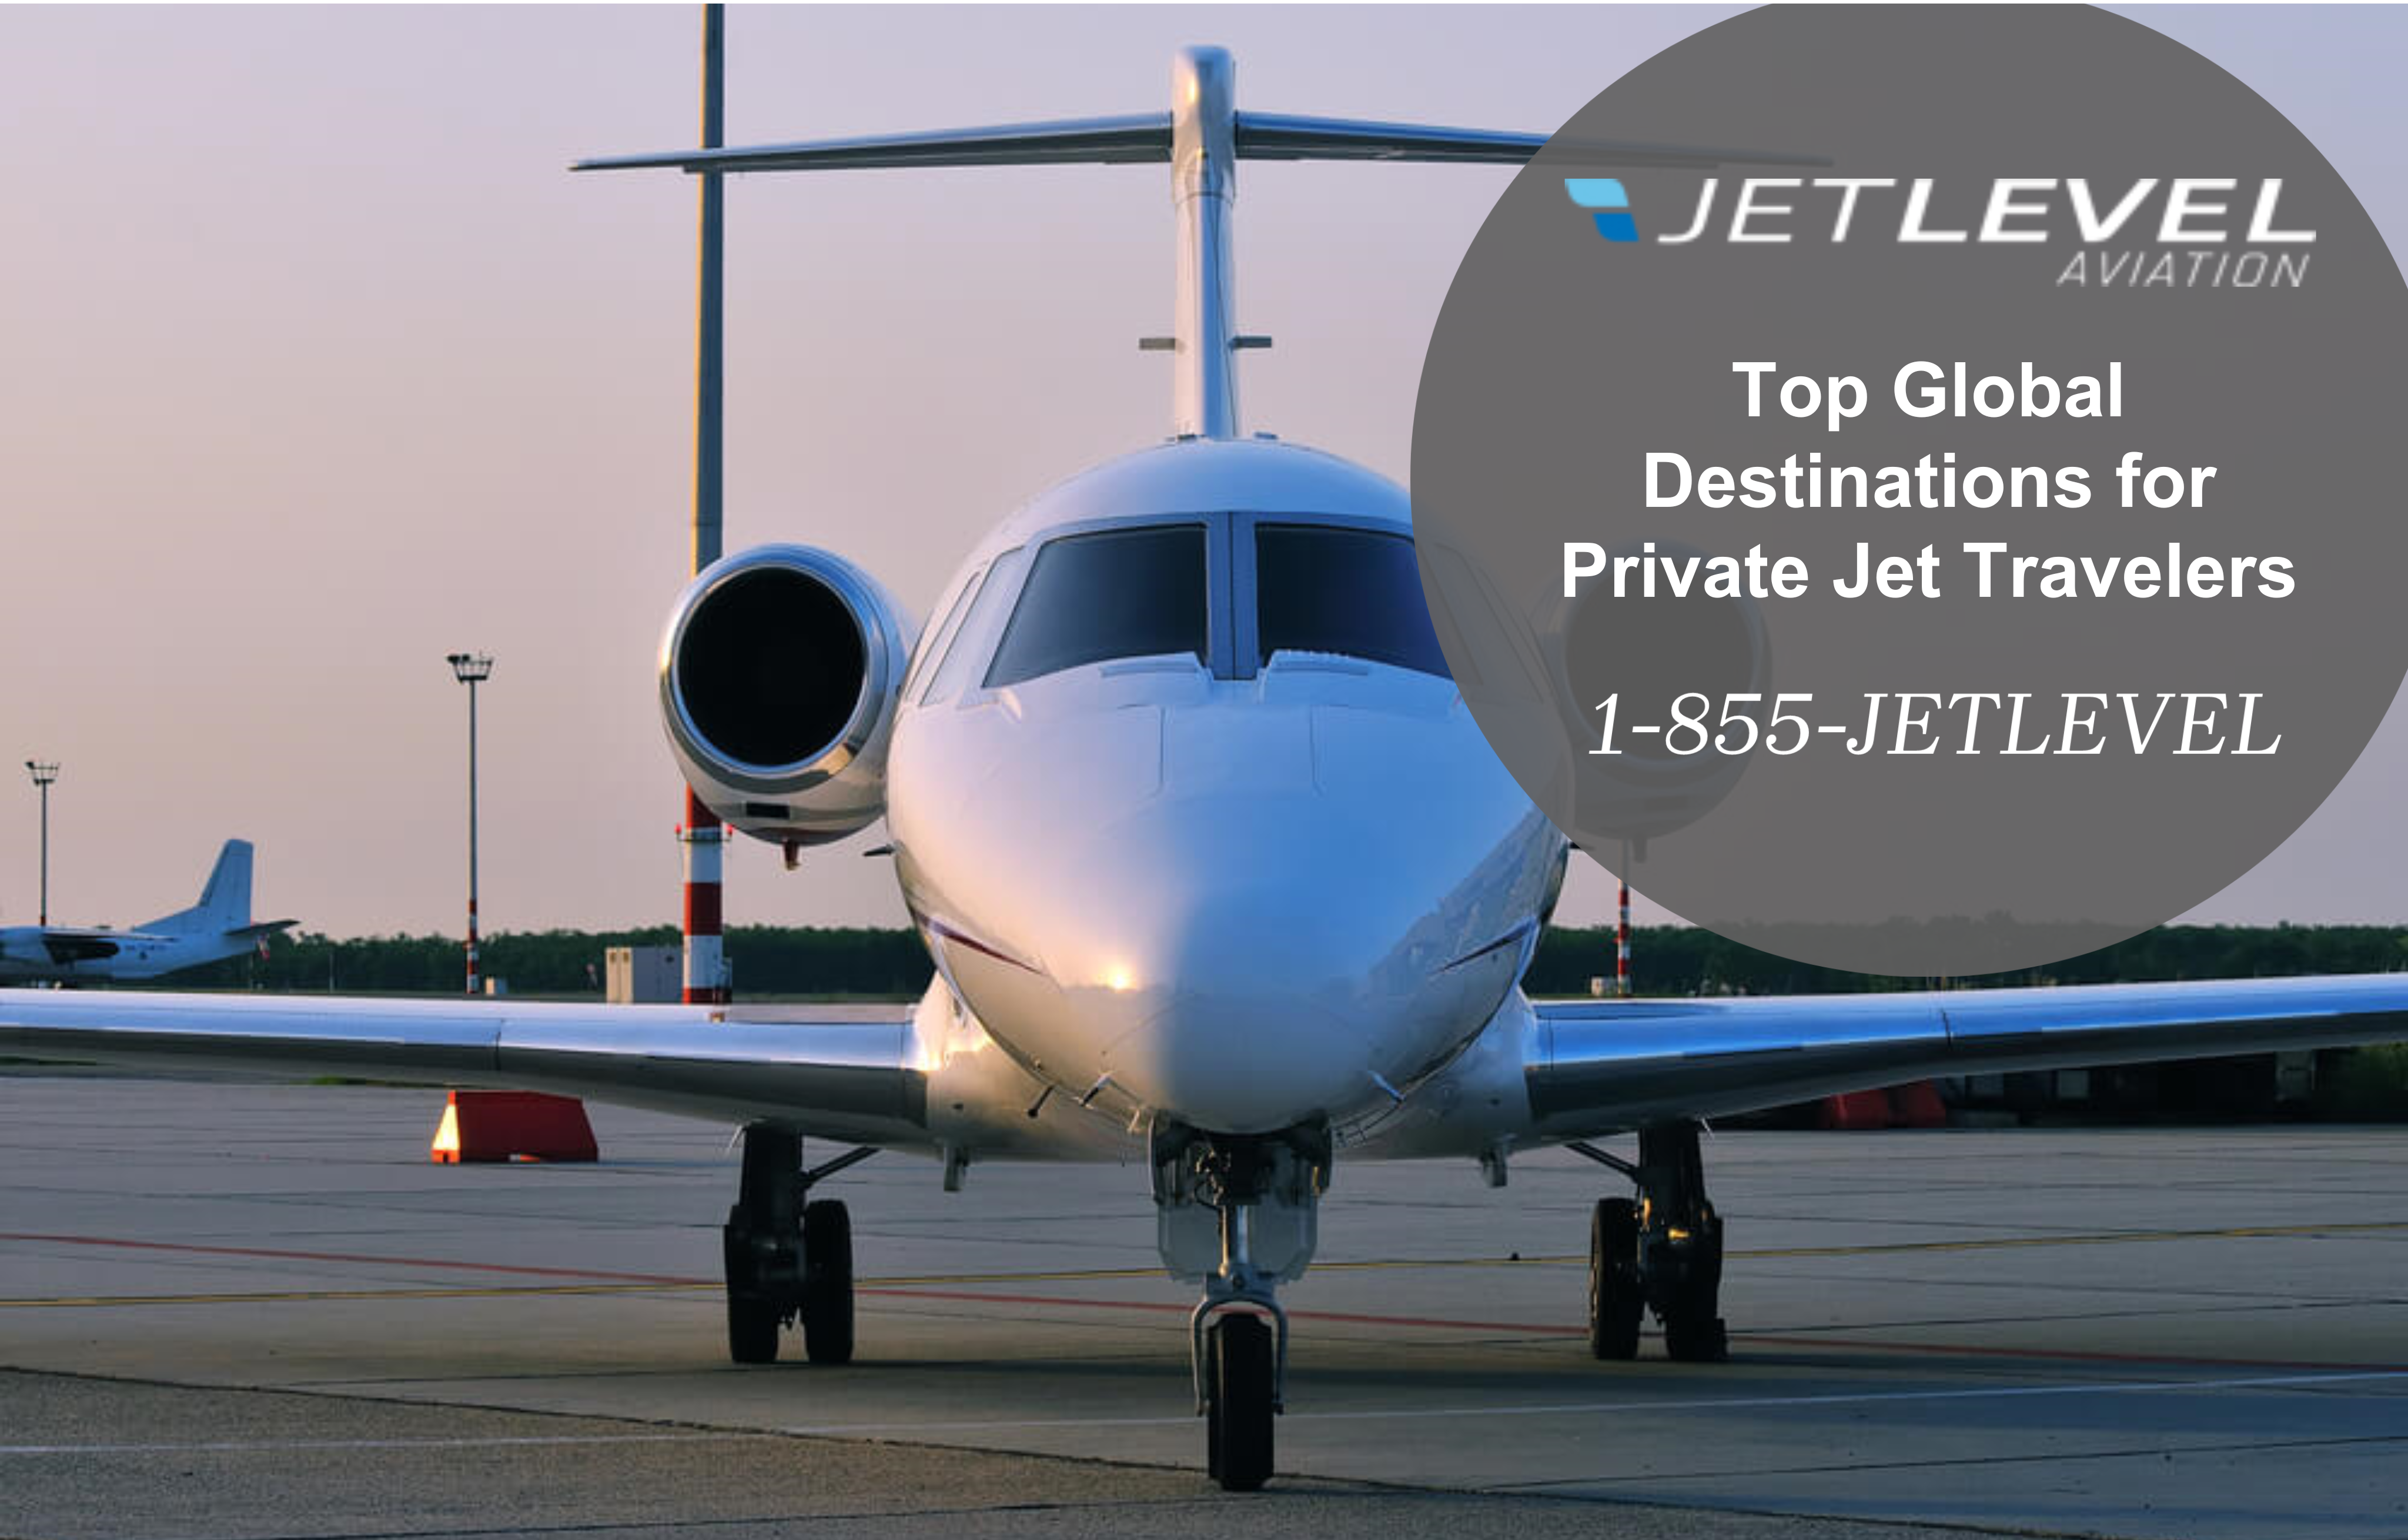 Top Global Destinations for Private Jet Travelers